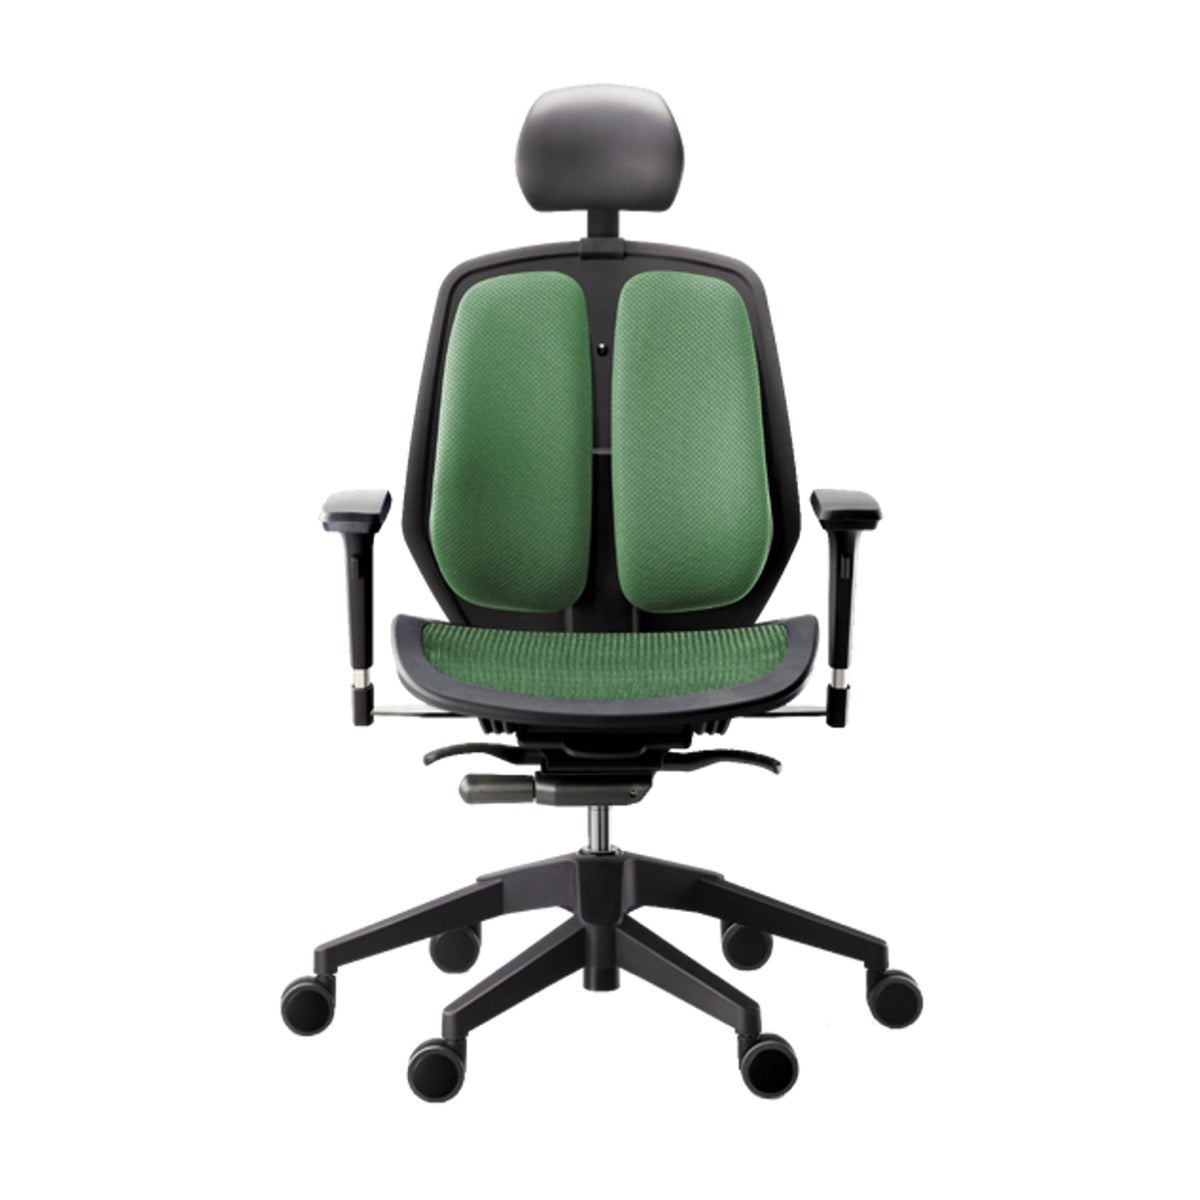 [SALE] DUOREST Alpha Collection Office Home Ergonomic Chair - A-80H